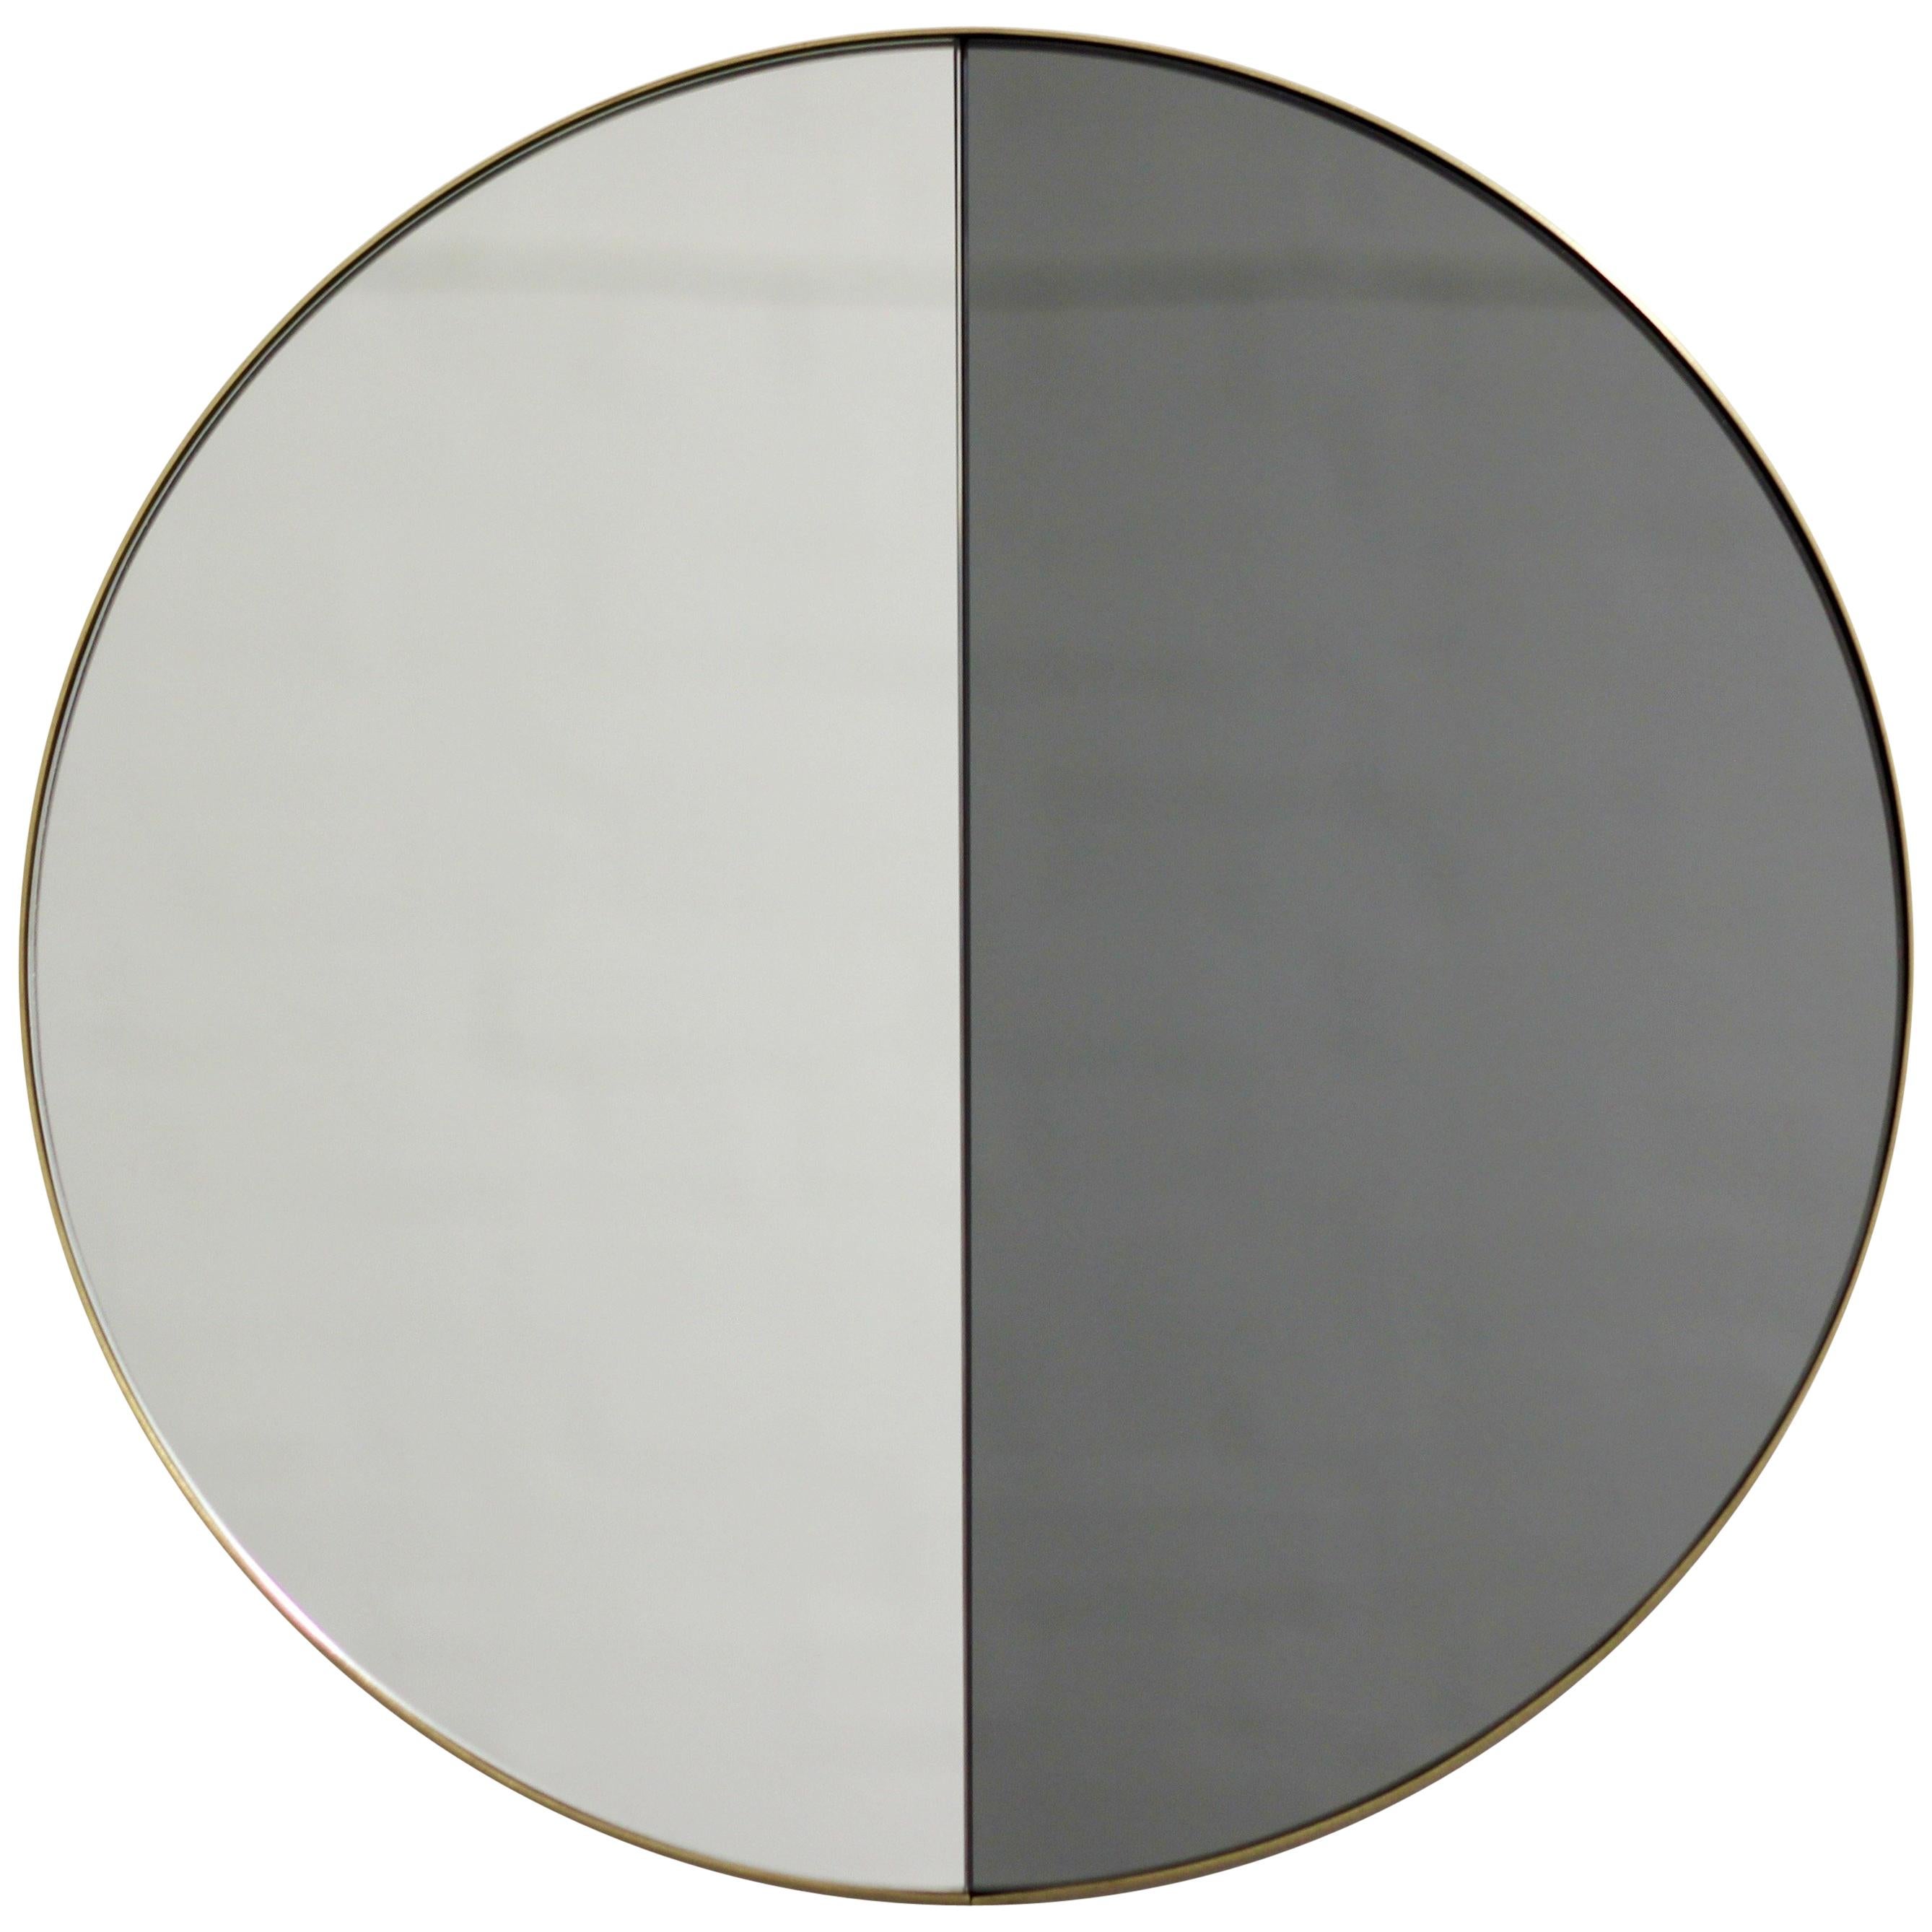 Contemporary mixed black and silver mirror tints Dualis Orbis™ with a solid brushed brass frame. Fitted with a quality hanging system that allows a flexible installation in 6 different positions (see pictures for reference). Designed and made in